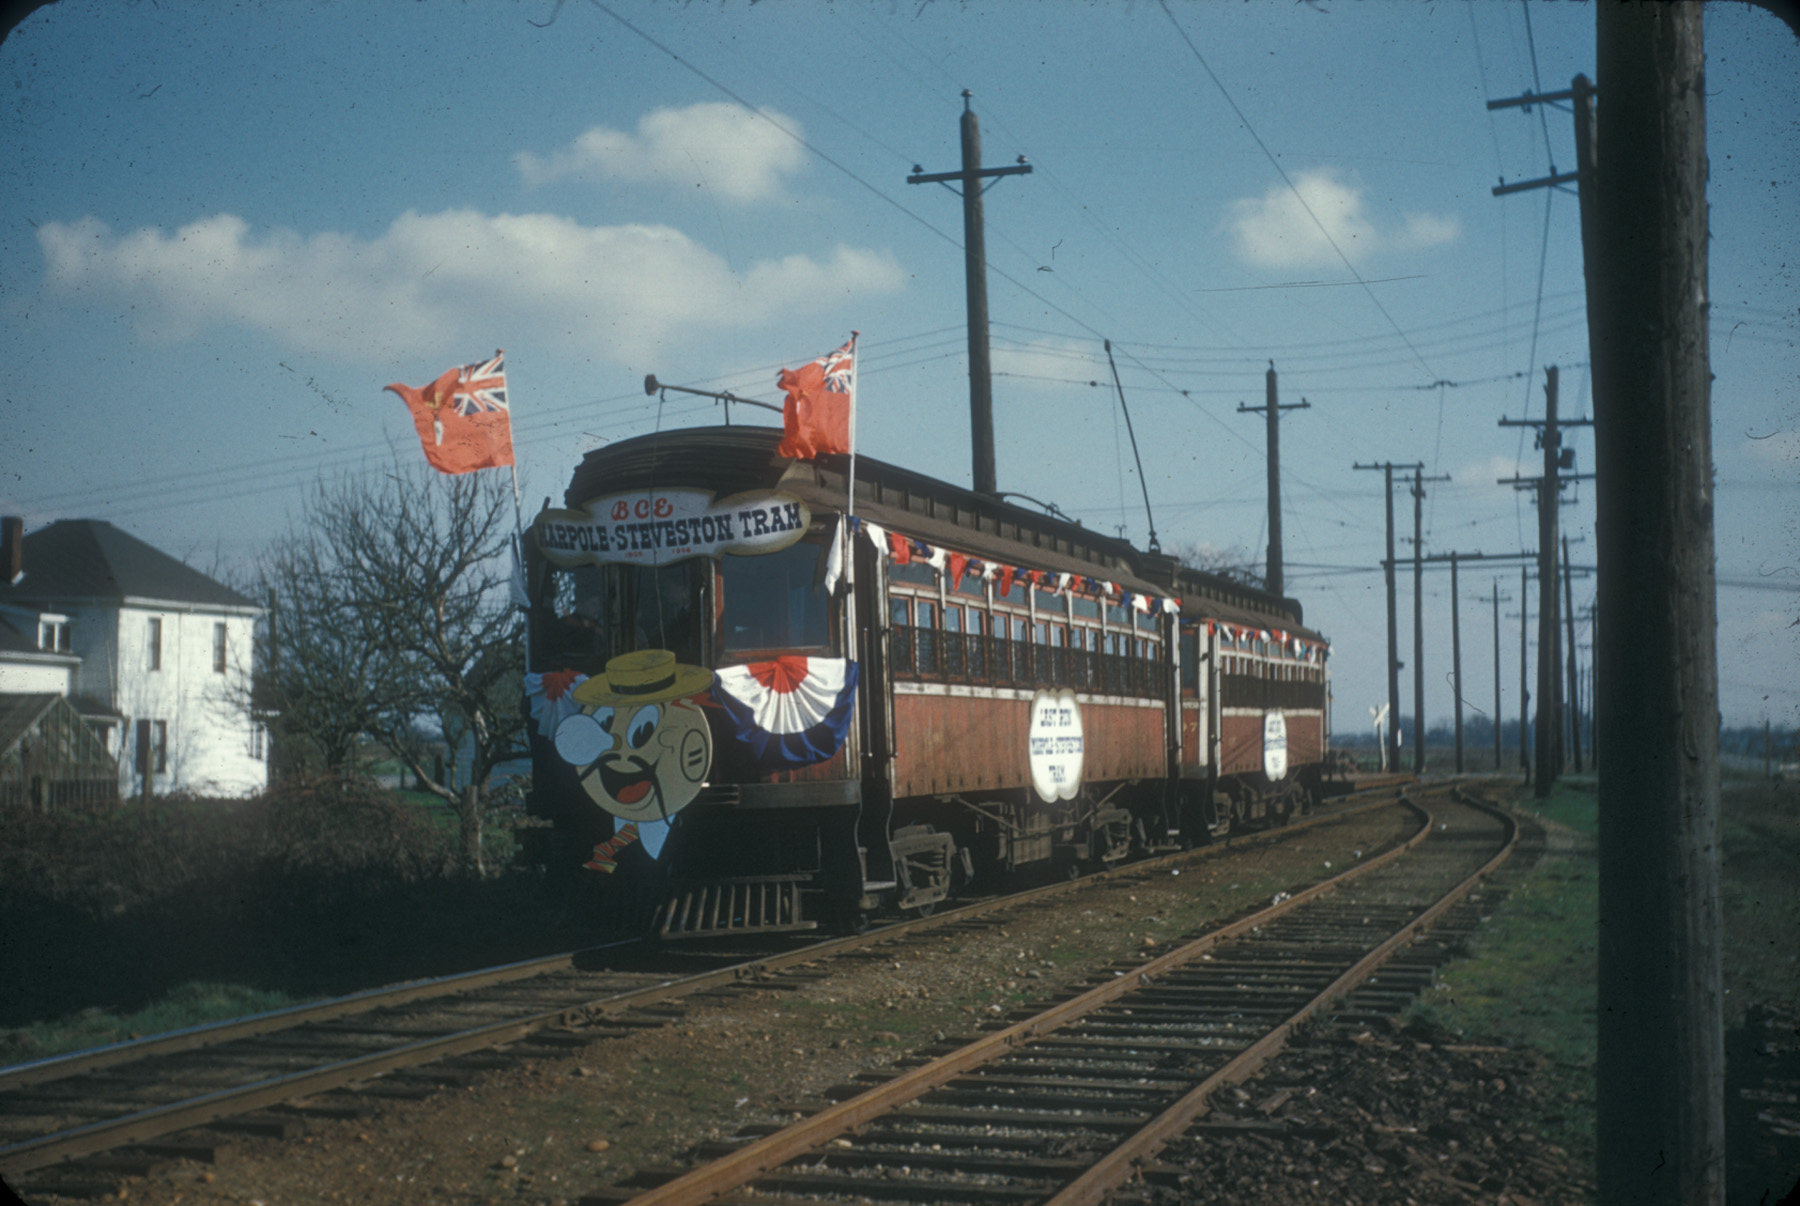 Two-car tram decorate with ribbons on rails under a blue sky with scattered clouds